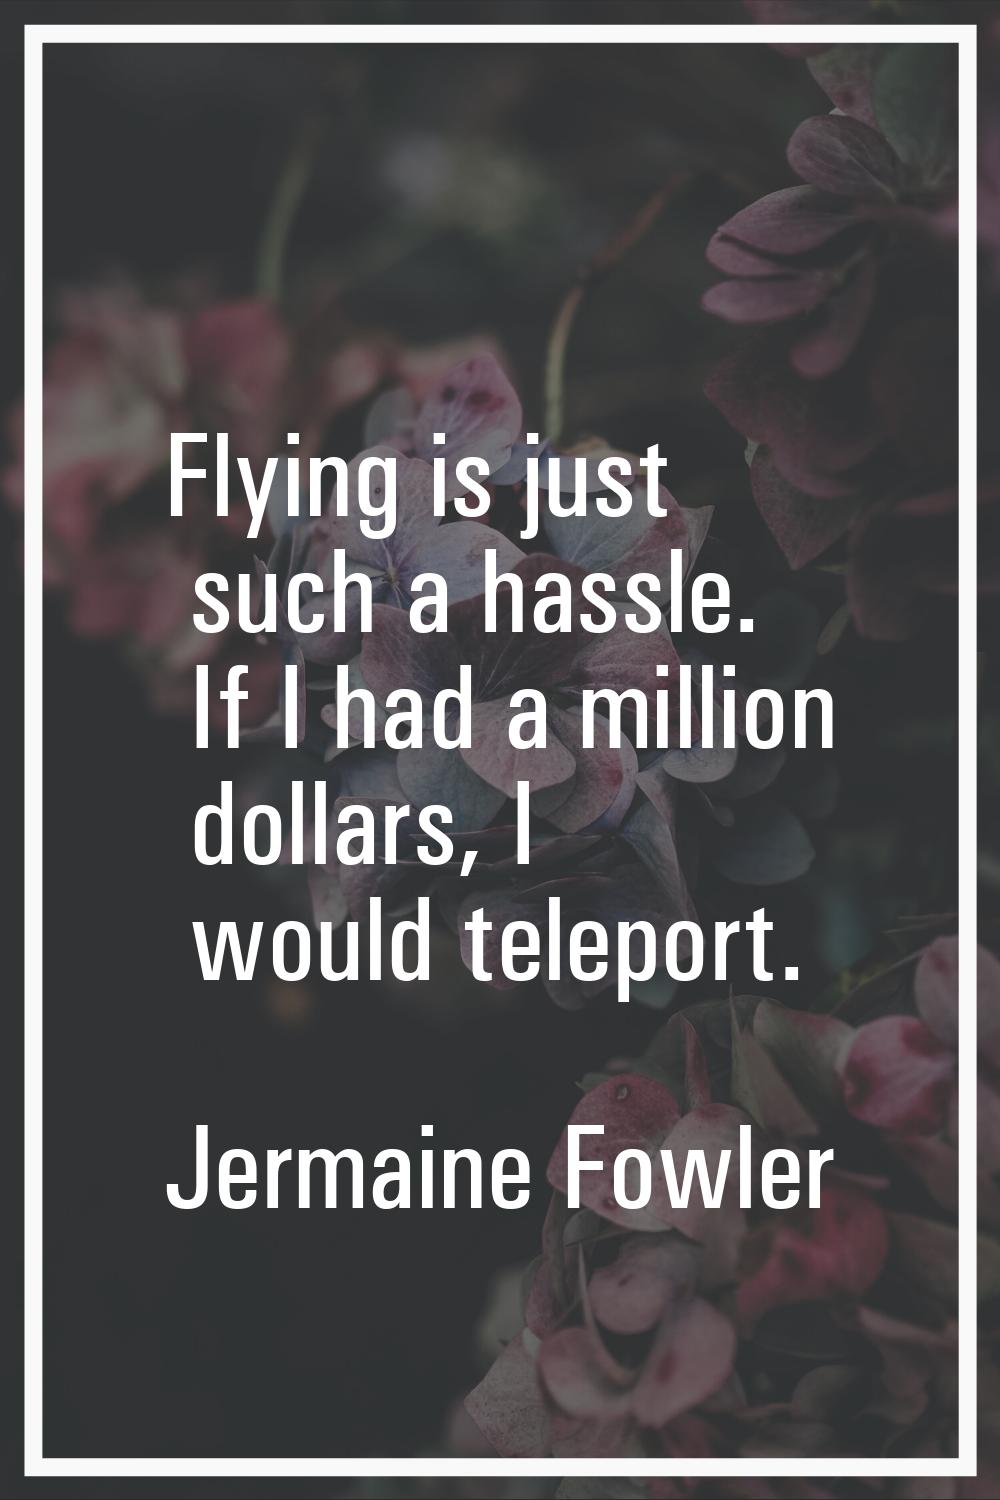 Flying is just such a hassle. If I had a million dollars, I would teleport.